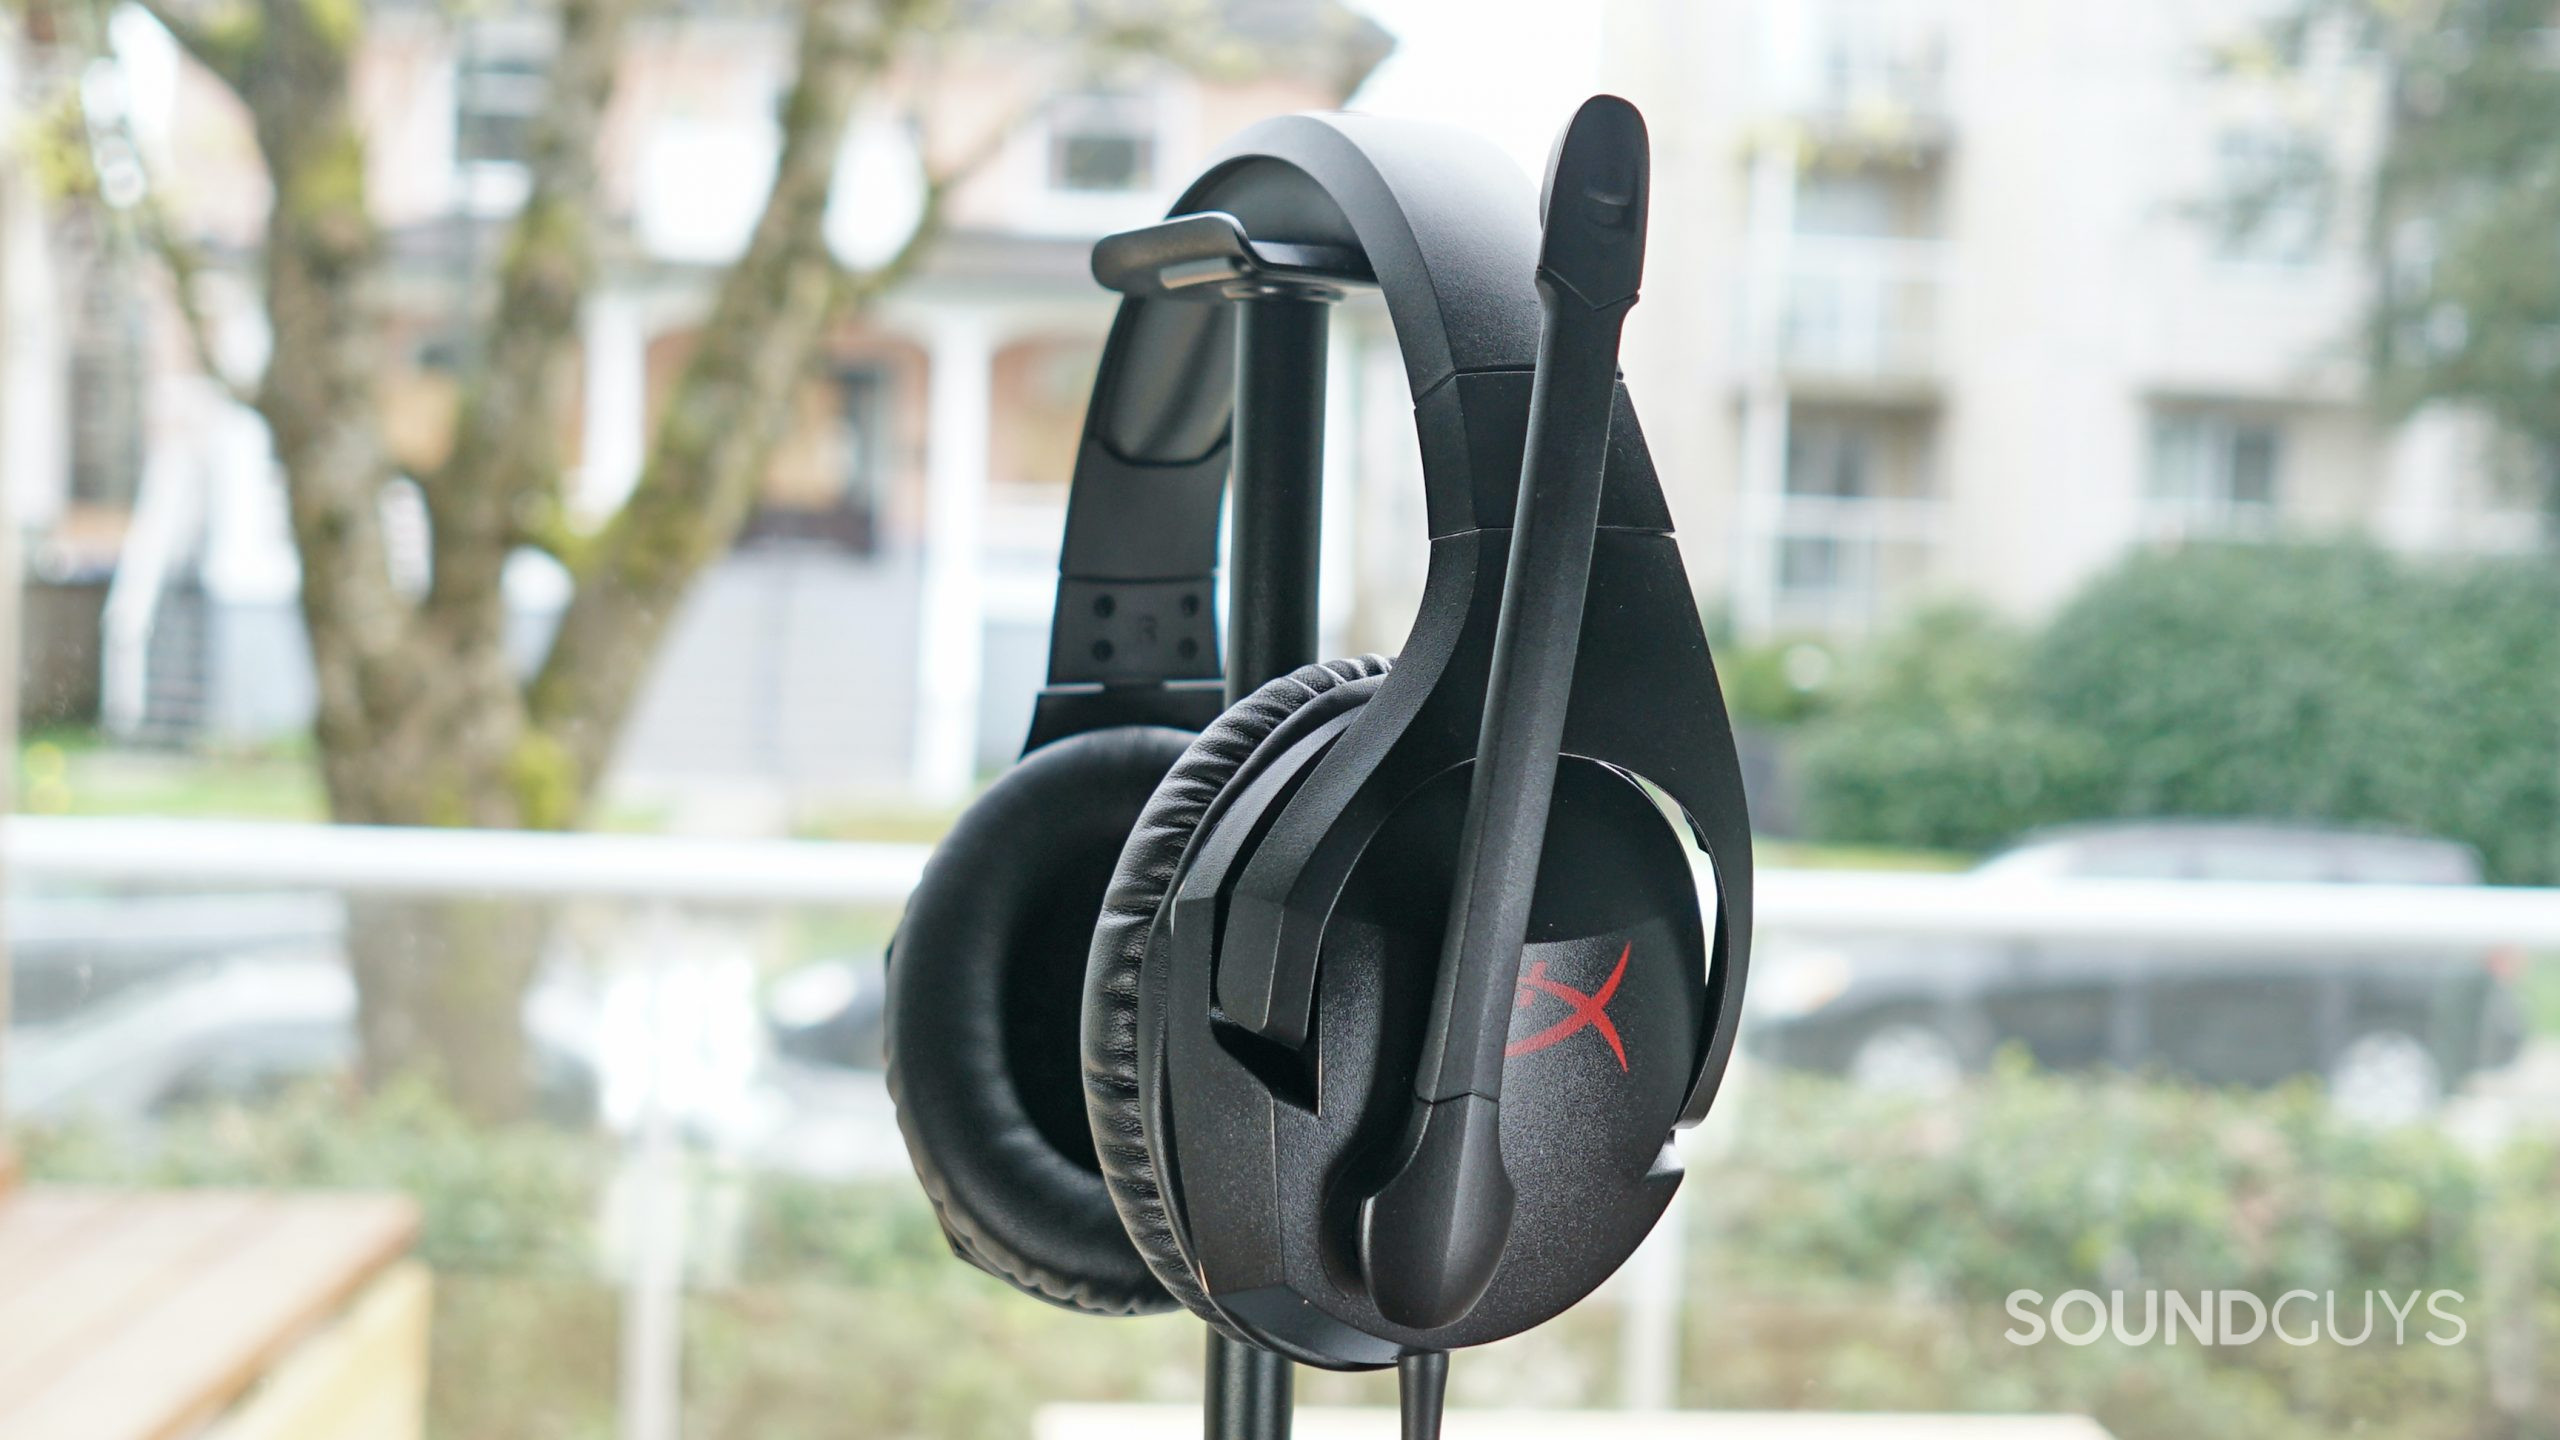 The HyperX Cloud Stinger sits on a headphone stand in front of a window.